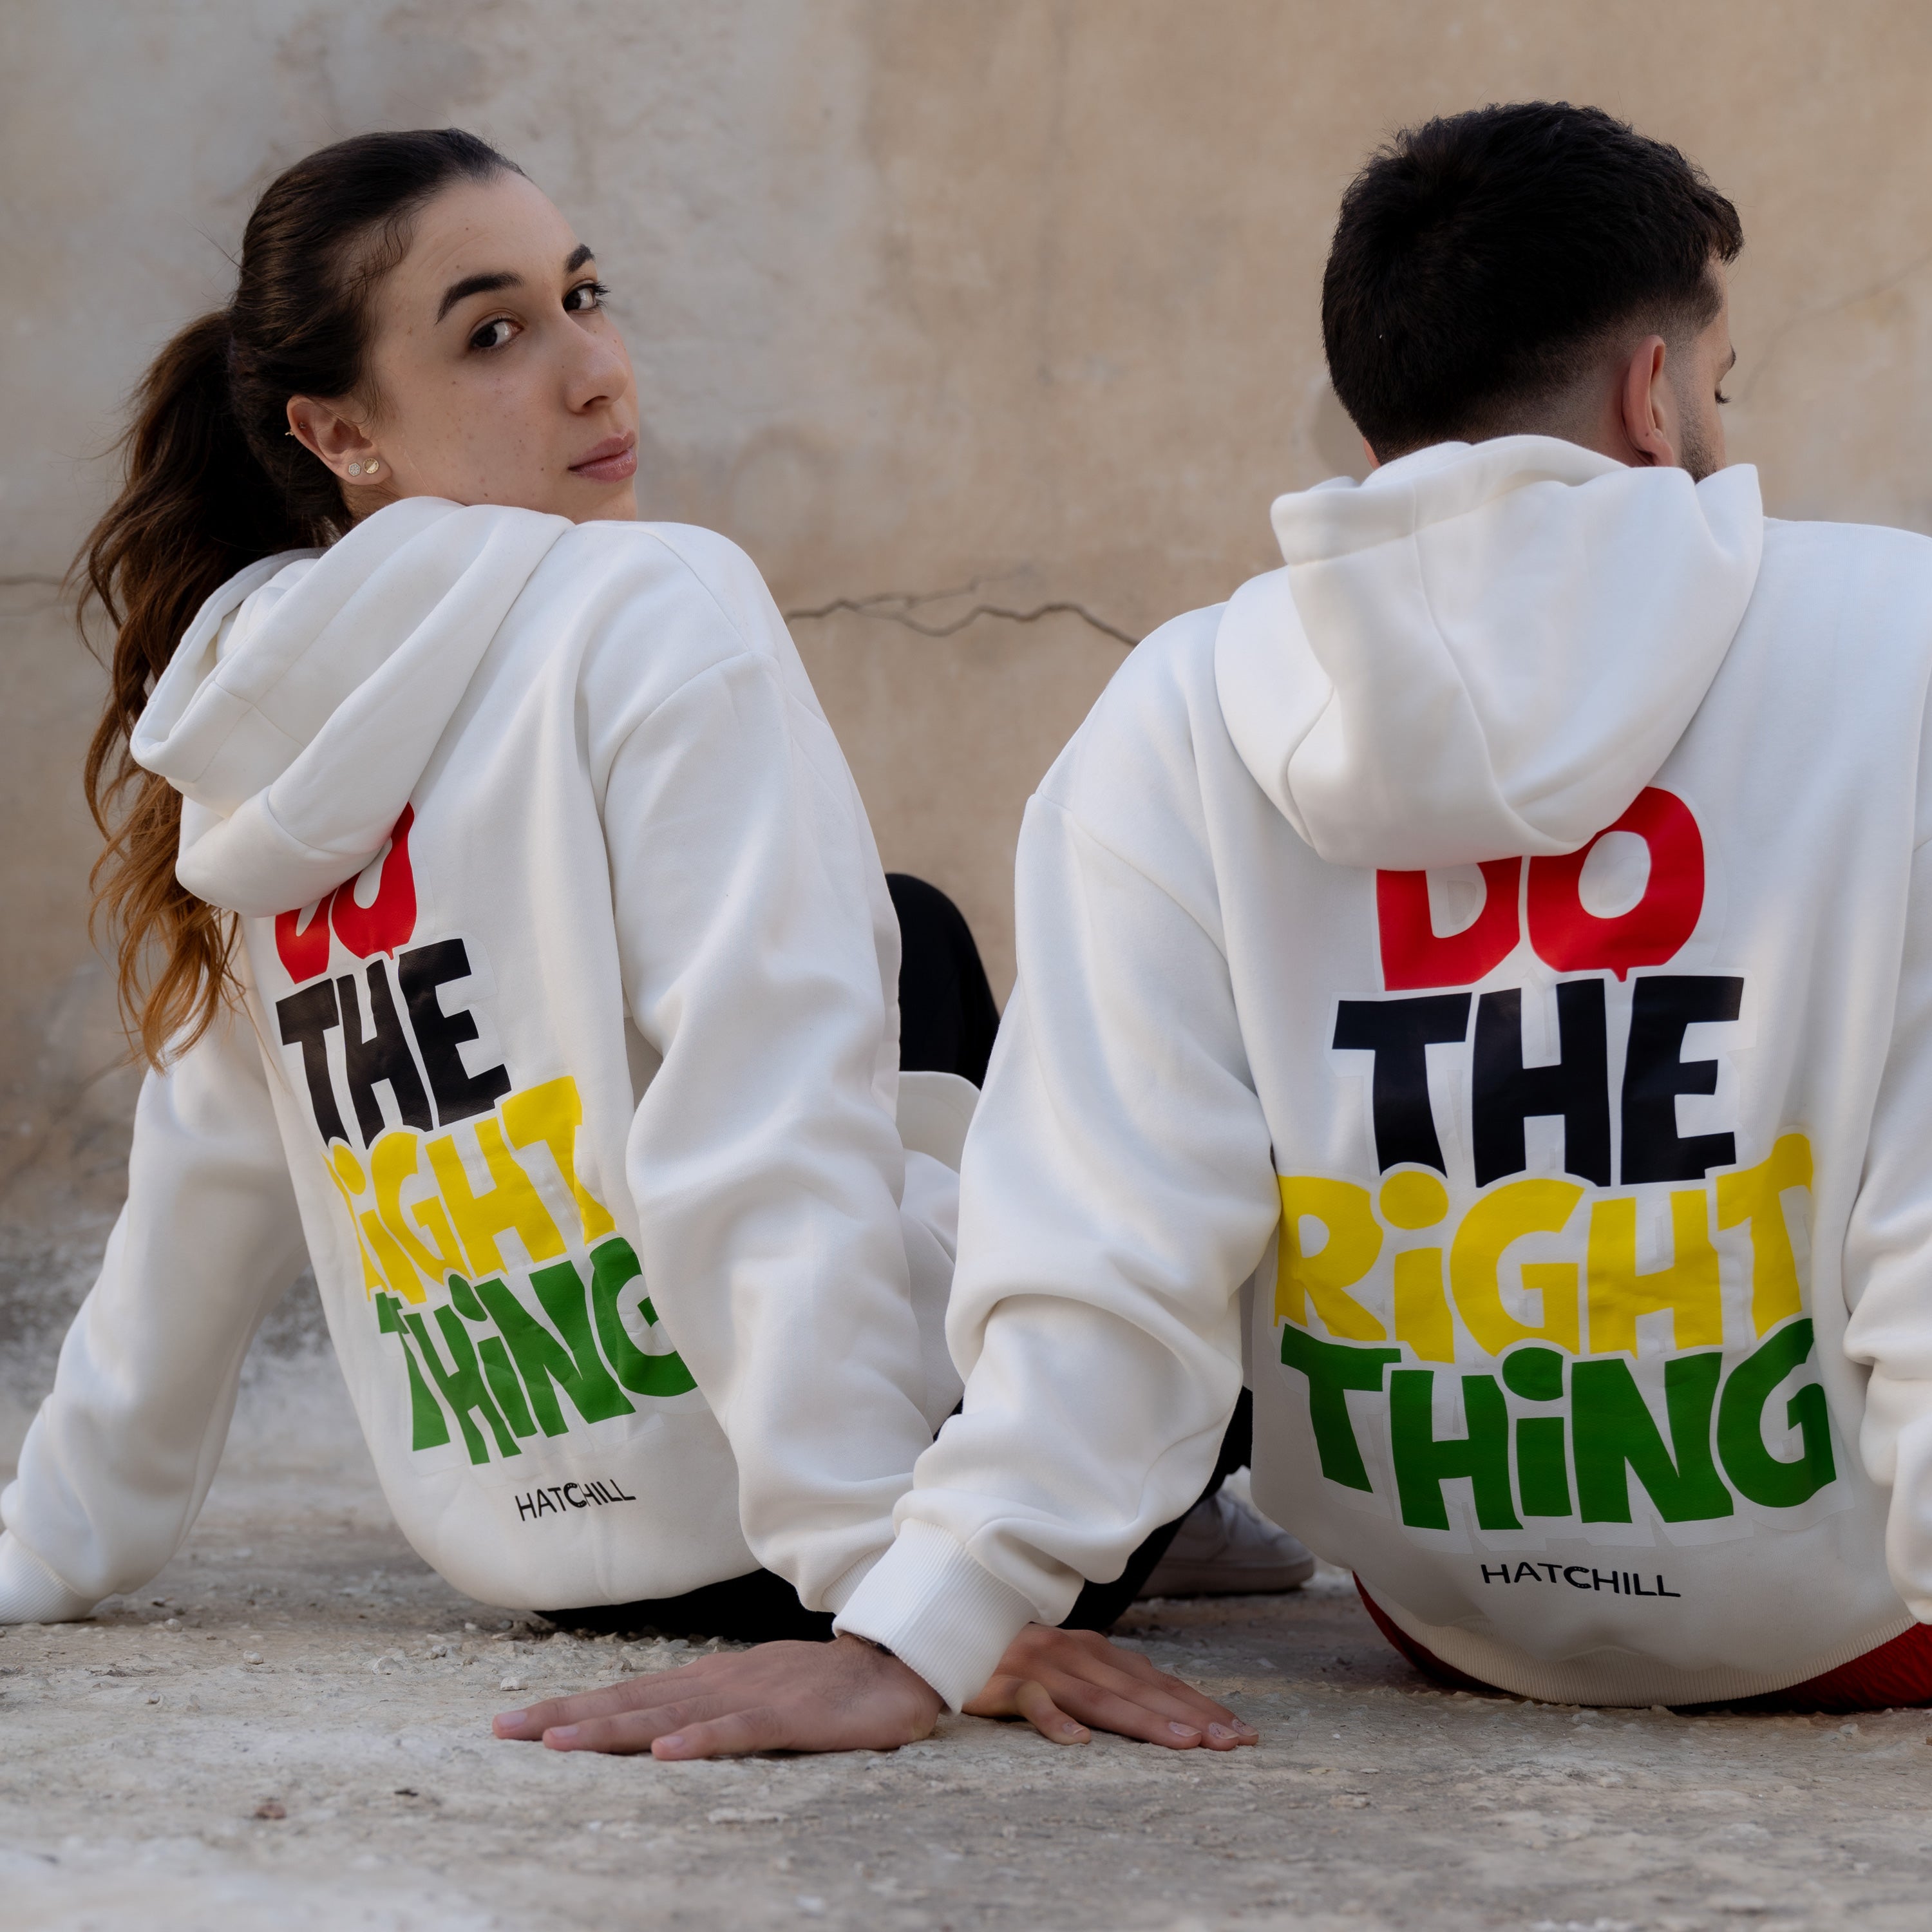 Do the right thing Hoodie